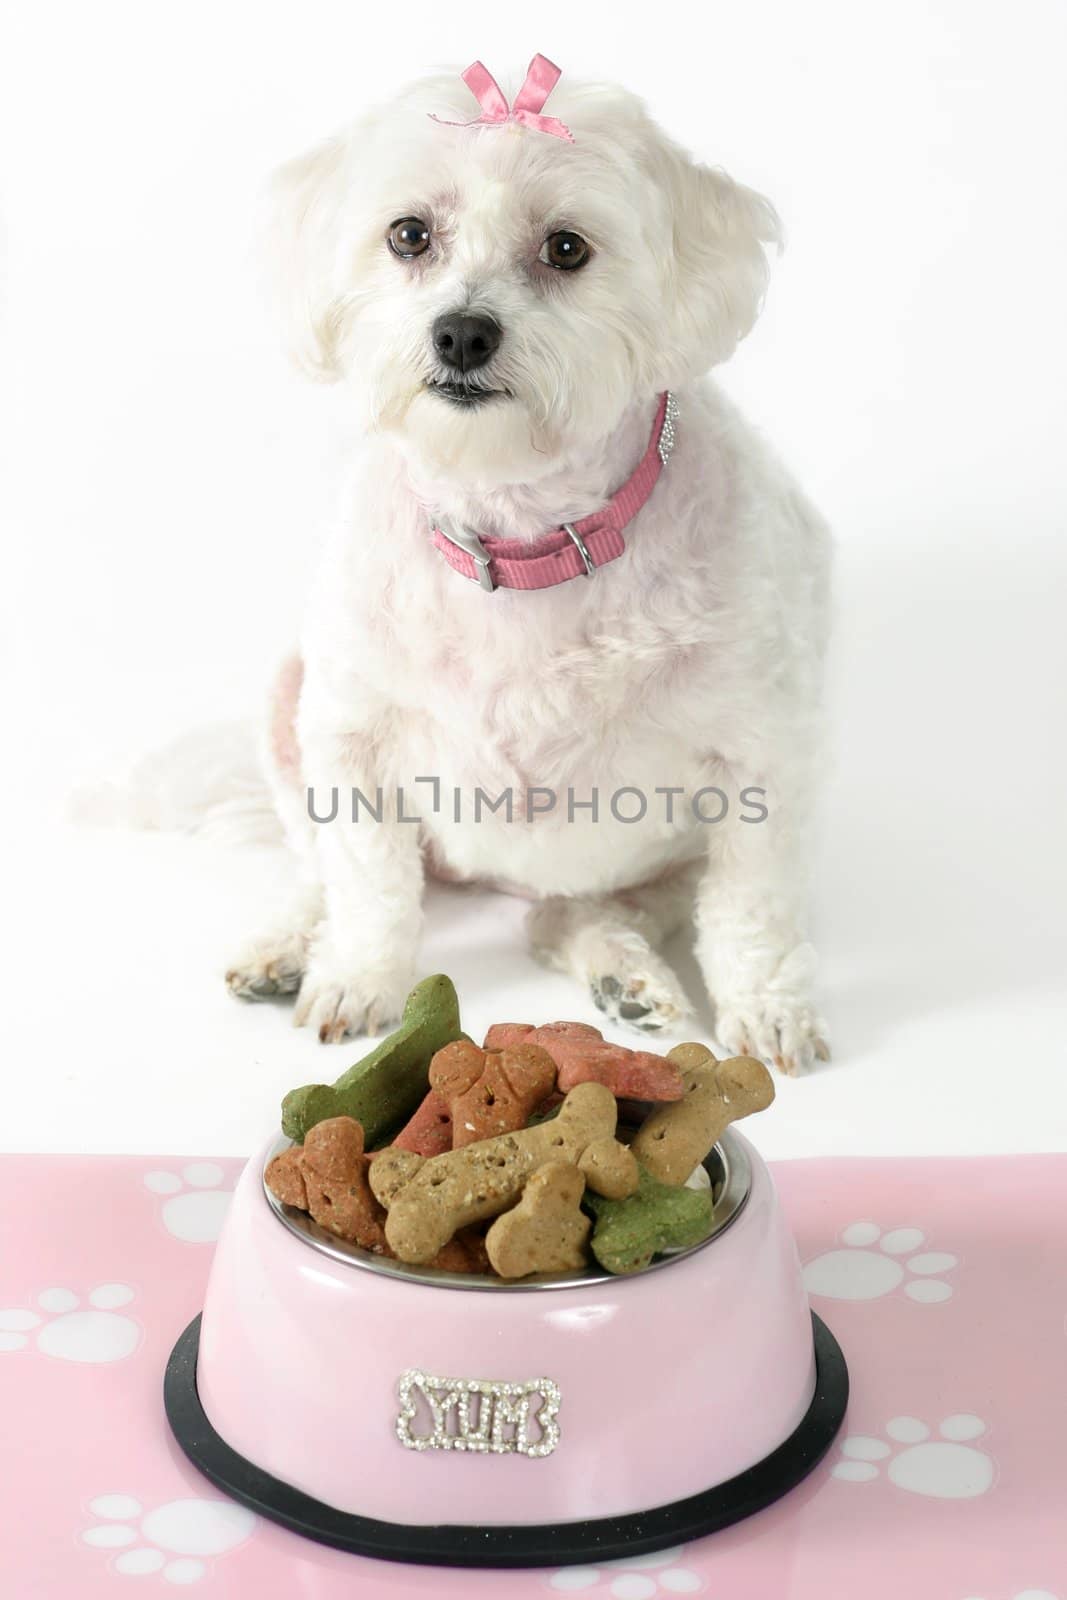 White maltese terrier with pink collar and ribbon sits in front of a pink dog bowl filled with doggie bone-shaped biscuits